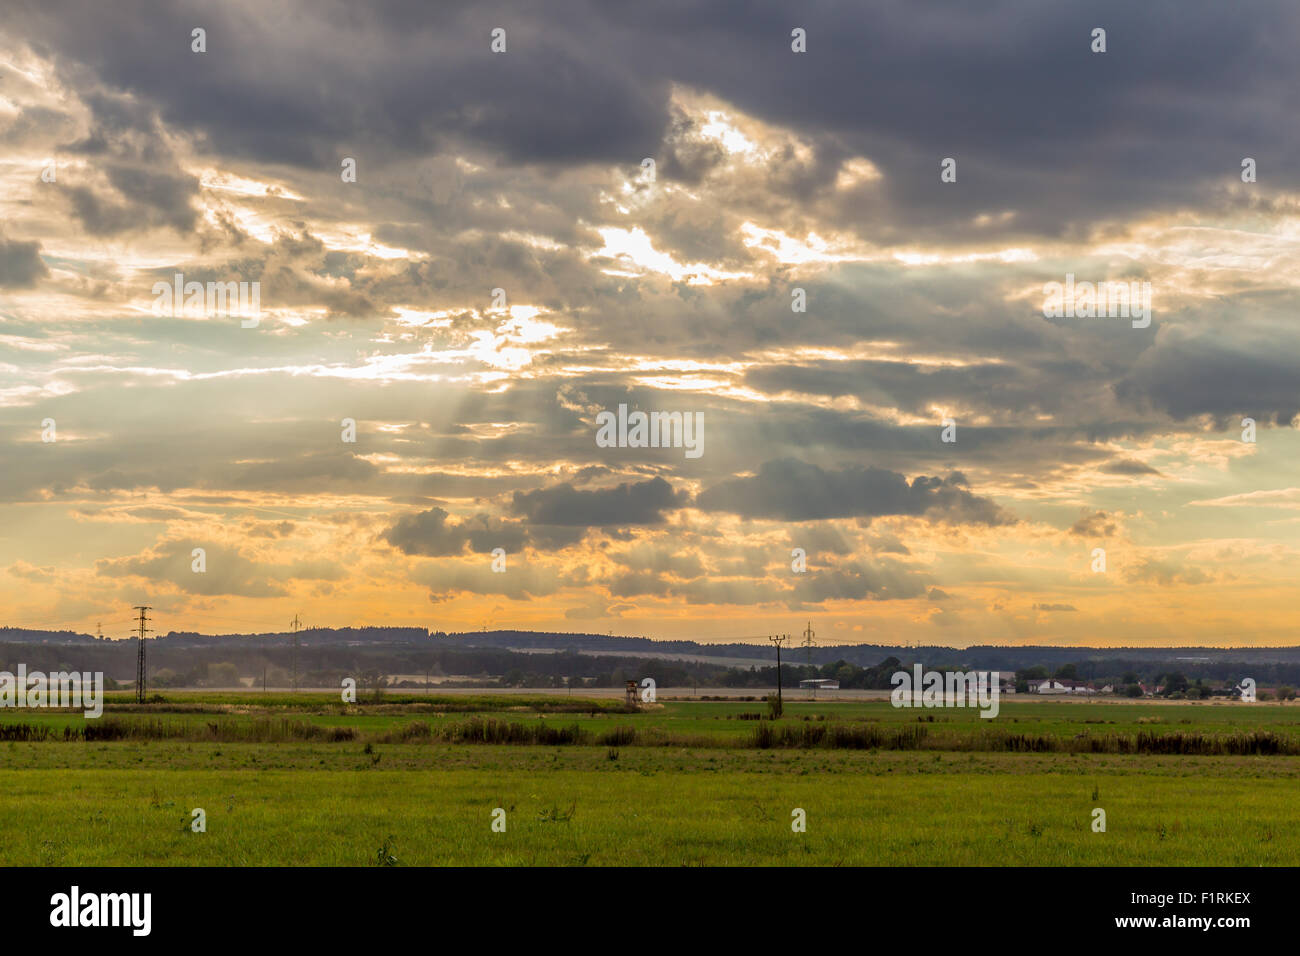 Dramatic sunset over green field Stock Photo